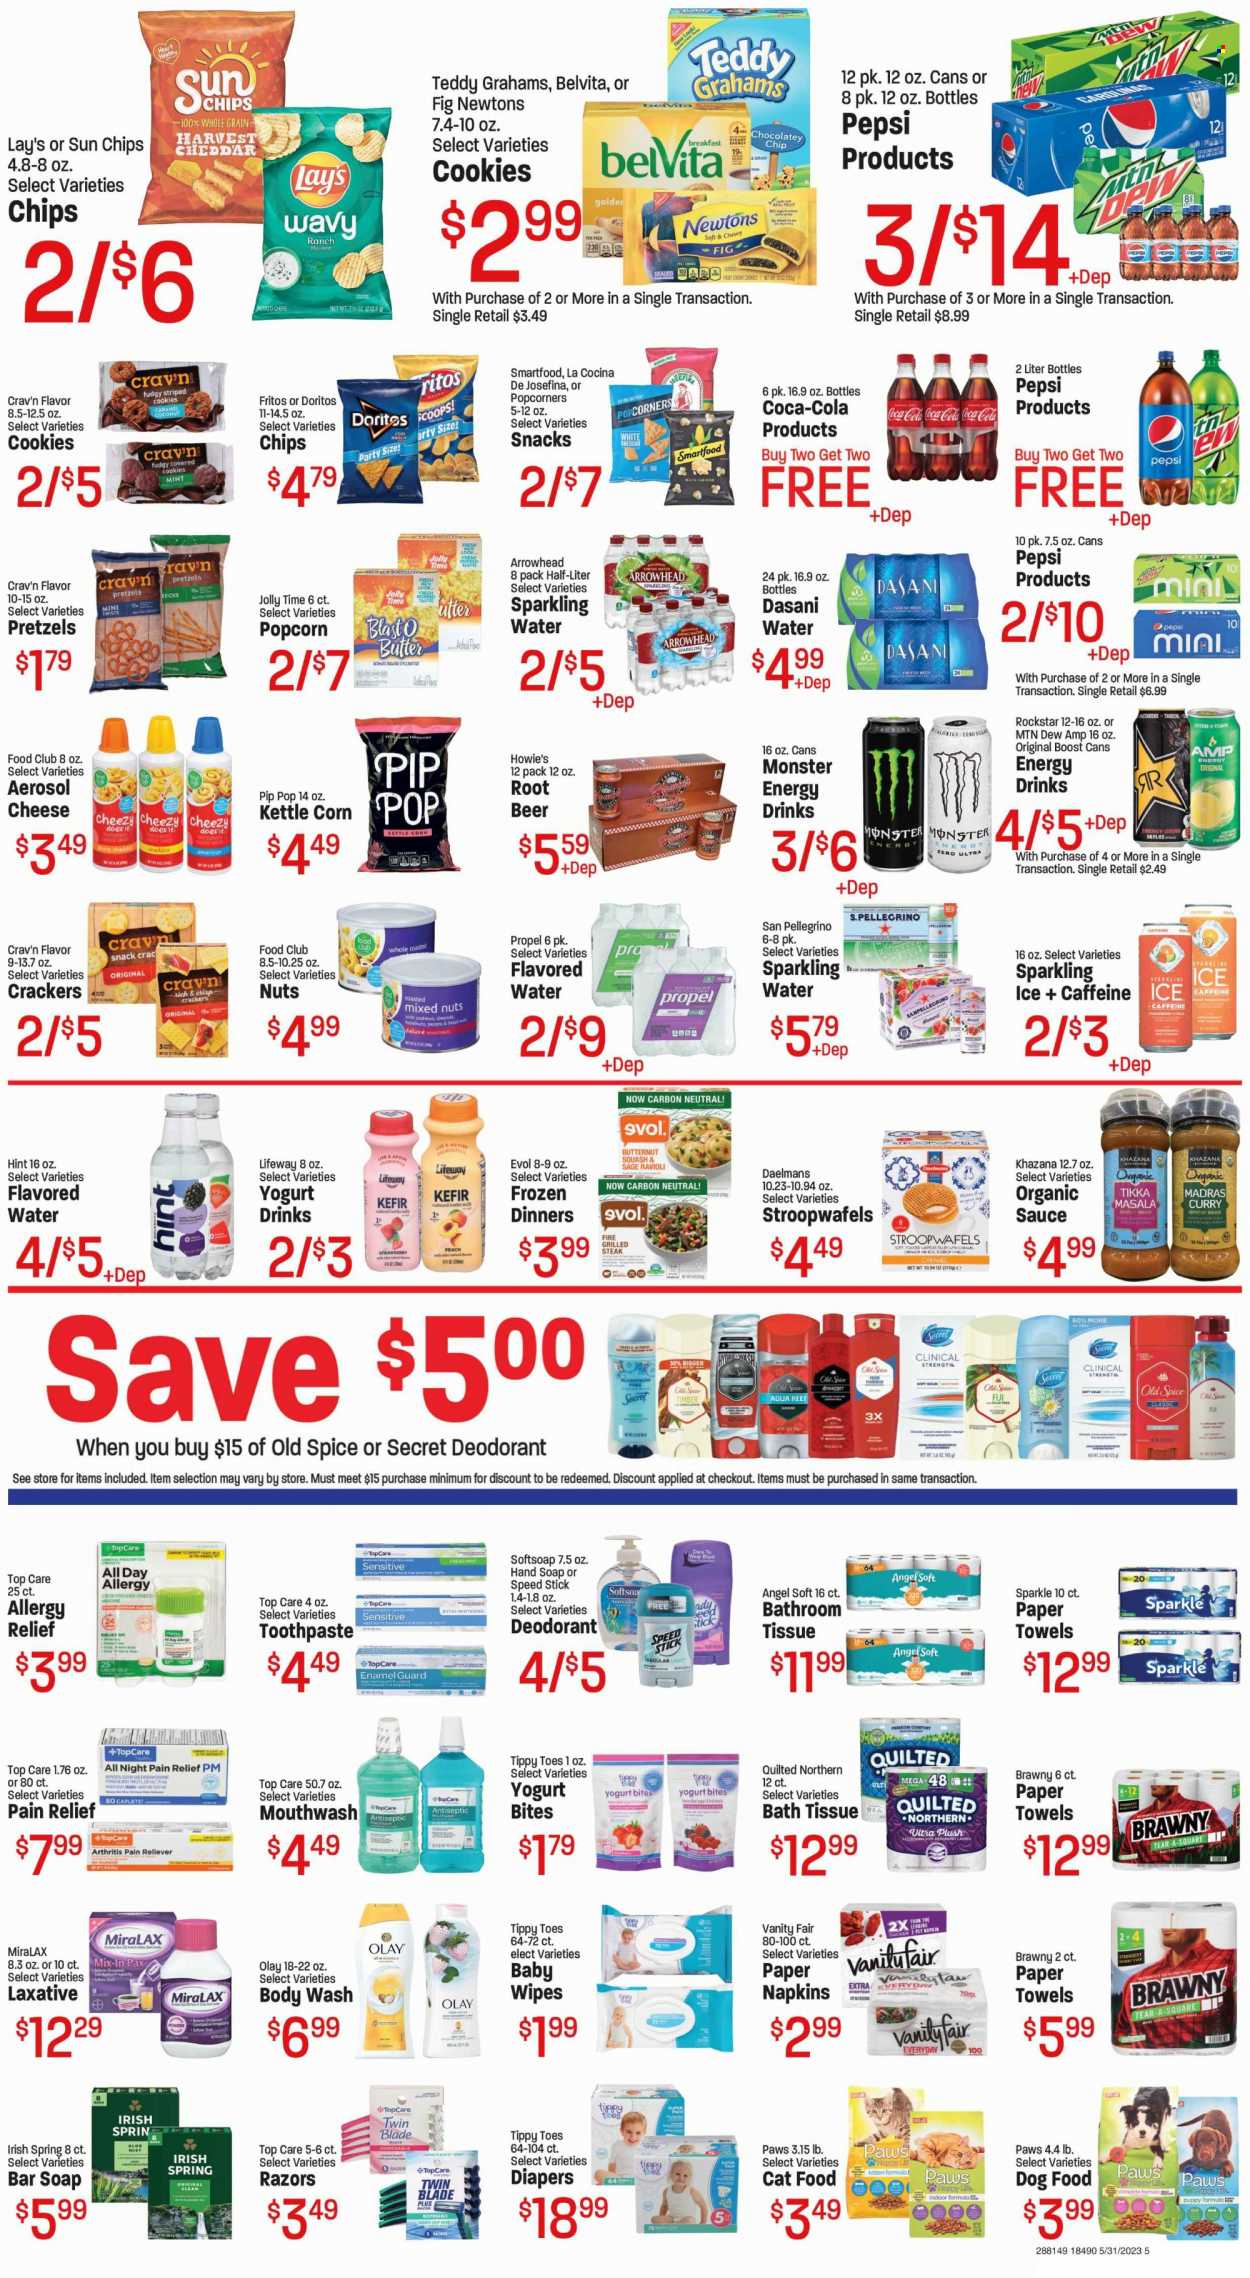 thumbnail - Red Apple Marketplace Flyer - 05/31/2023 - 06/06/2023 - Sales products - pretzels, waffles, butternut squash, ravioli, sauce, Tikka Masala, snack, cheese, milk, yoghurt drink, kefir, cookies, crackers, Doritos, Fritos, kettle corn, potato chips, Lay’s, Smartfood, popcorn, salty snack, belVita, caramel, almonds, cashews, hazelnuts, mixed nuts, Coca-Cola, Mountain Dew, Pepsi, energy drink, Monster, soft drink, Monster Energy, Rockstar, flavored water, sparkling water, San Pellegrino, water, Boost, alcohol, beer, steak, wipes, baby wipes, napkins, nappies, bath tissue, Quilted Northern, kitchen towels, paper towels, body wash, Softsoap, hand soap, Old Spice, soap bar, soap, toothpaste, mouthwash, Olay, anti-perspirant, Speed Stick, deodorant, razor. Page 5.